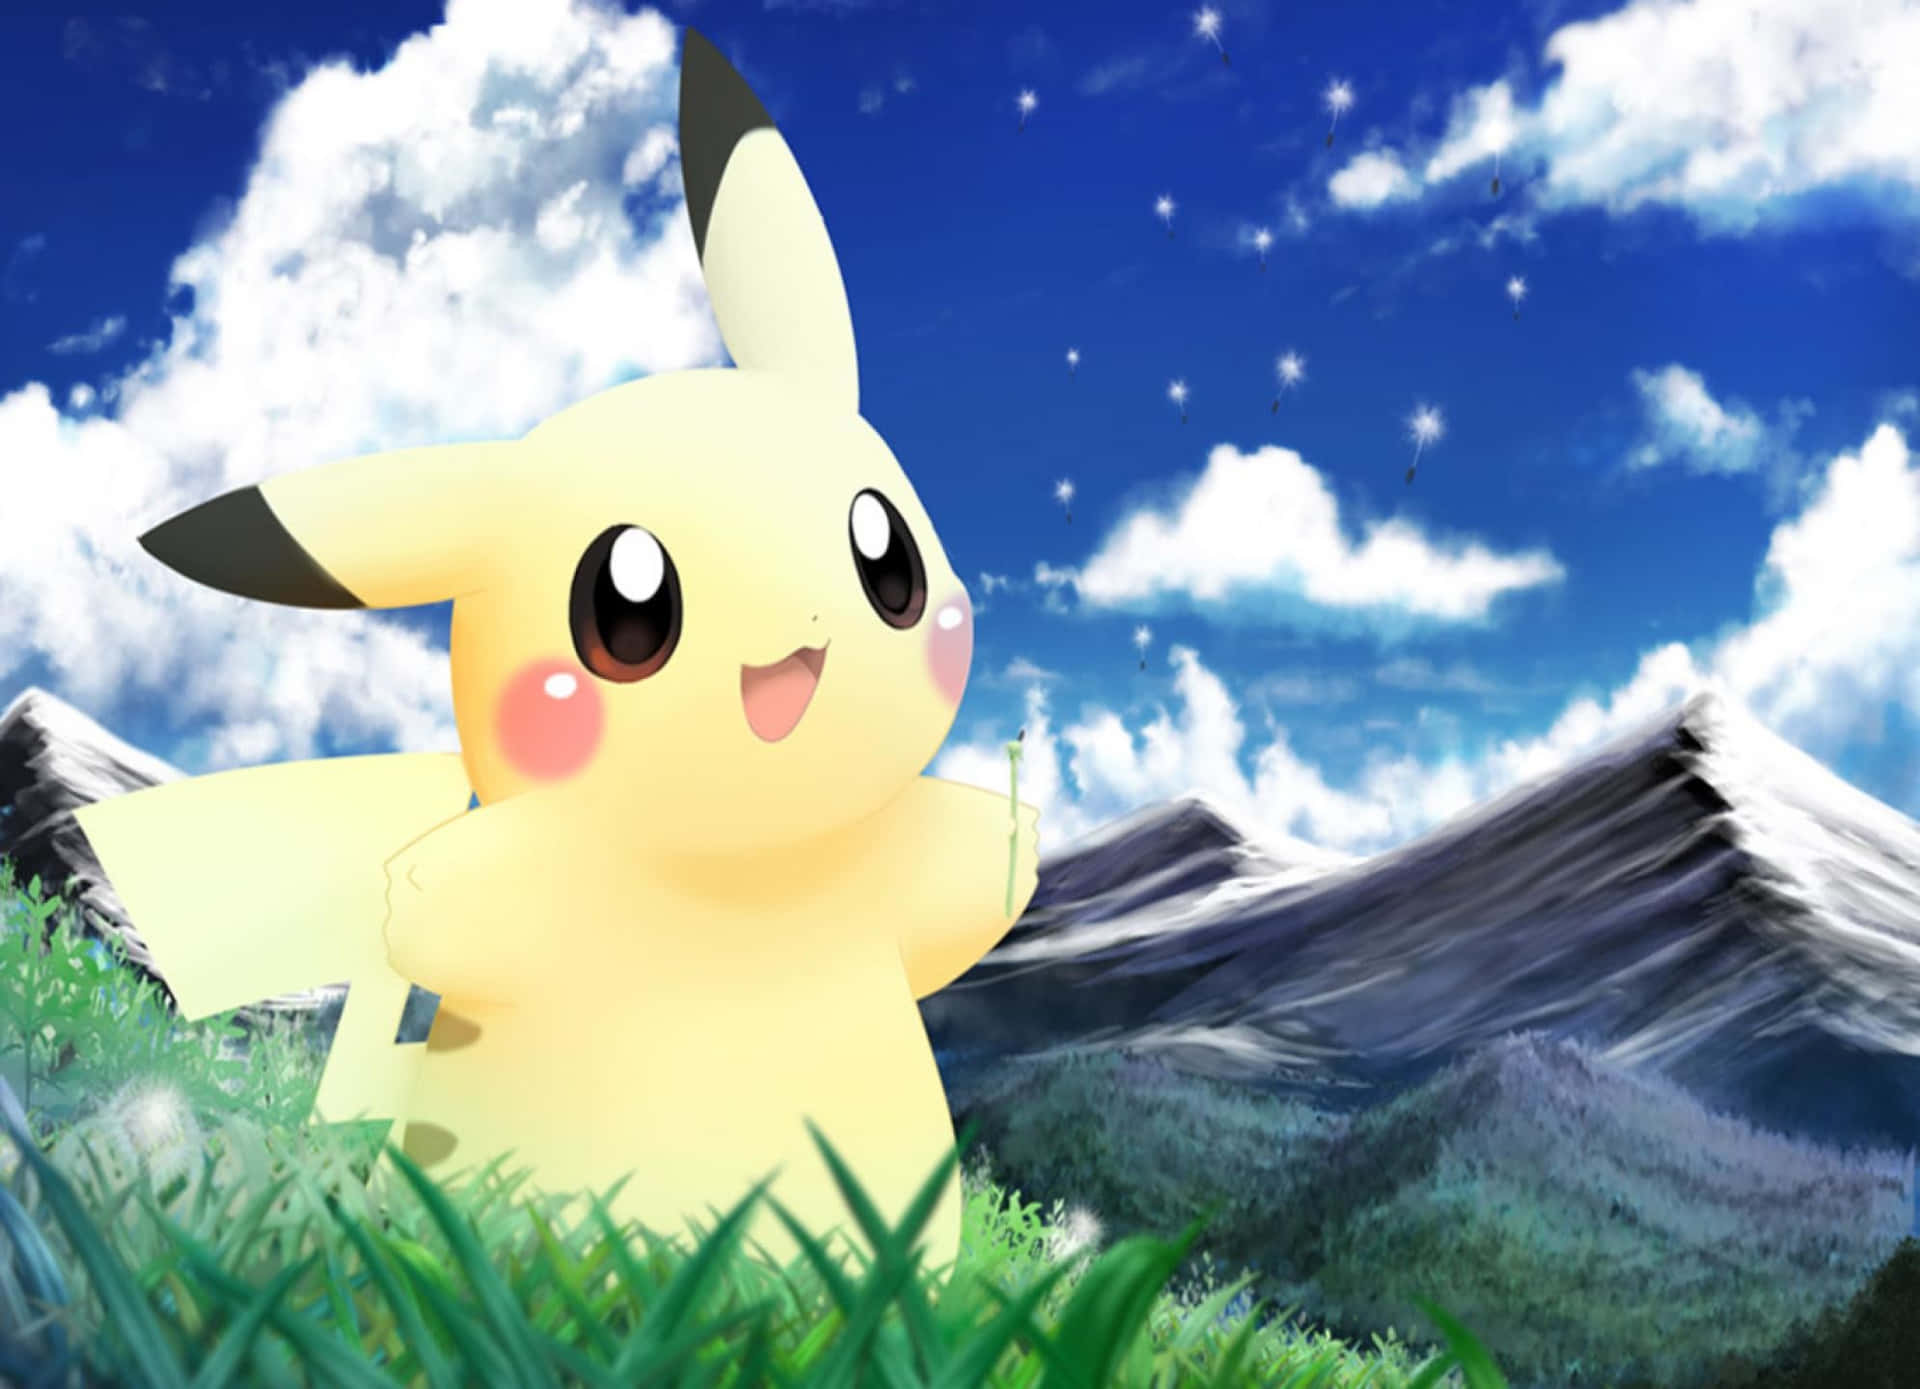 Download This Little Baby Pikachu Is So Cute! Wallpaper ...